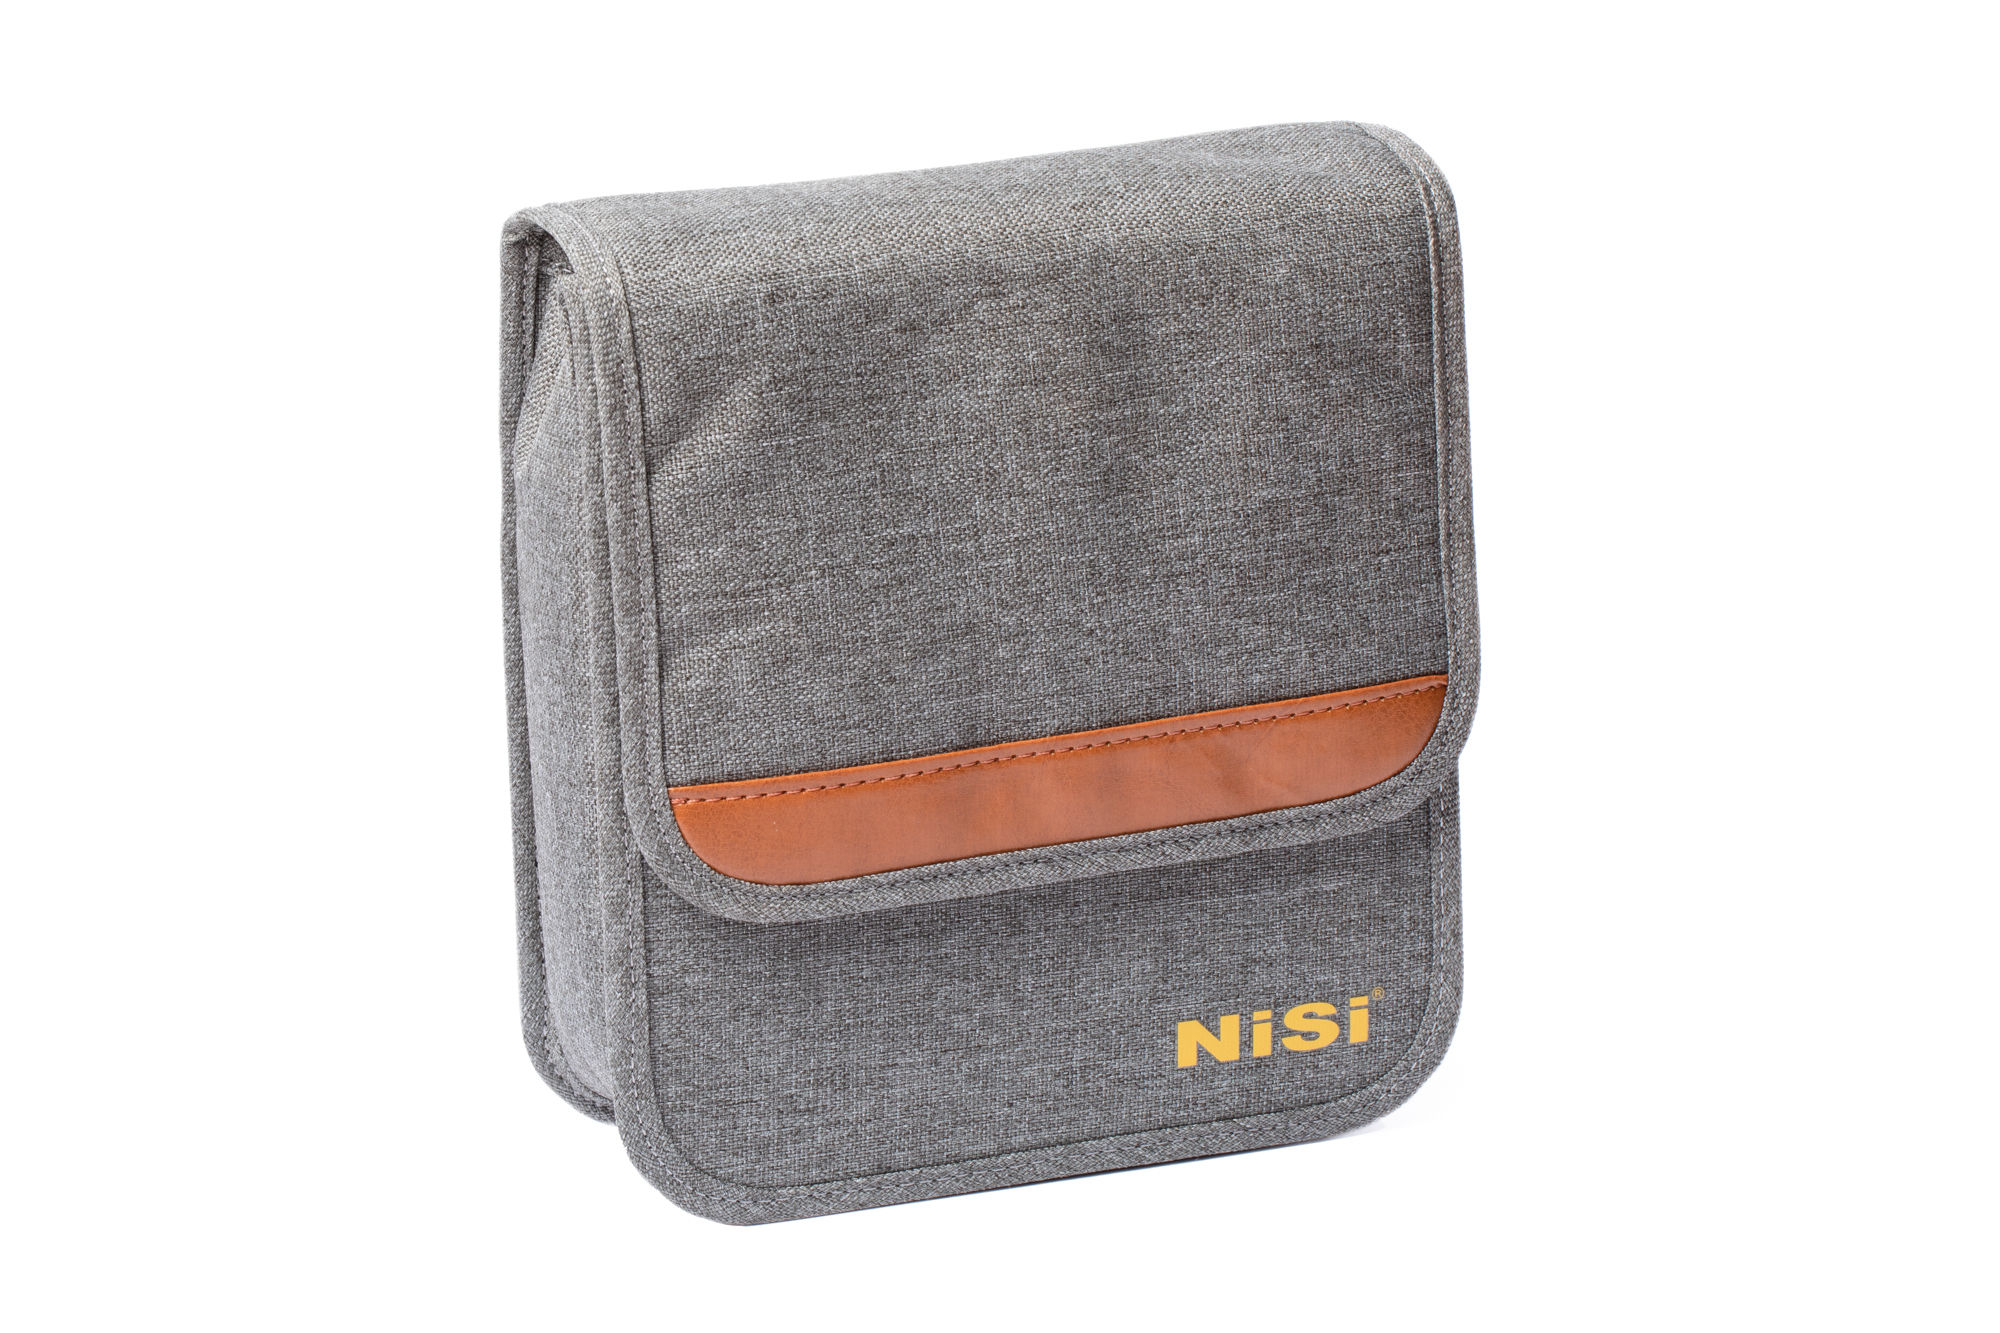 NiSi S6 150mm Filter Holder Pouch NiSi Optics USA 